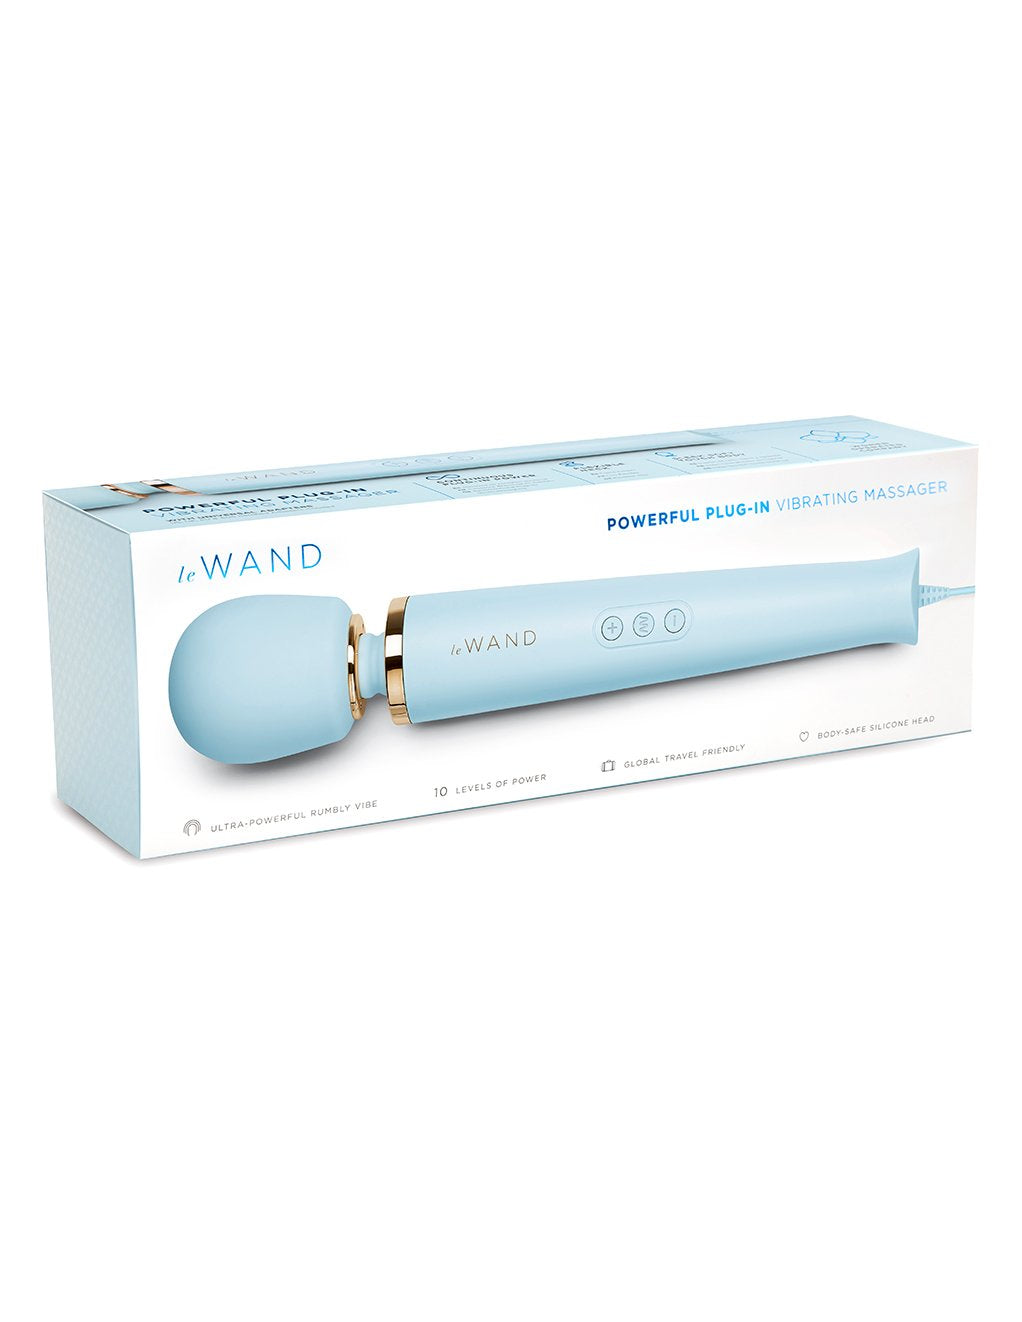 Le Wand Plug-In Vibrating Body Massager with 8 Foot Cord- Blue- Box